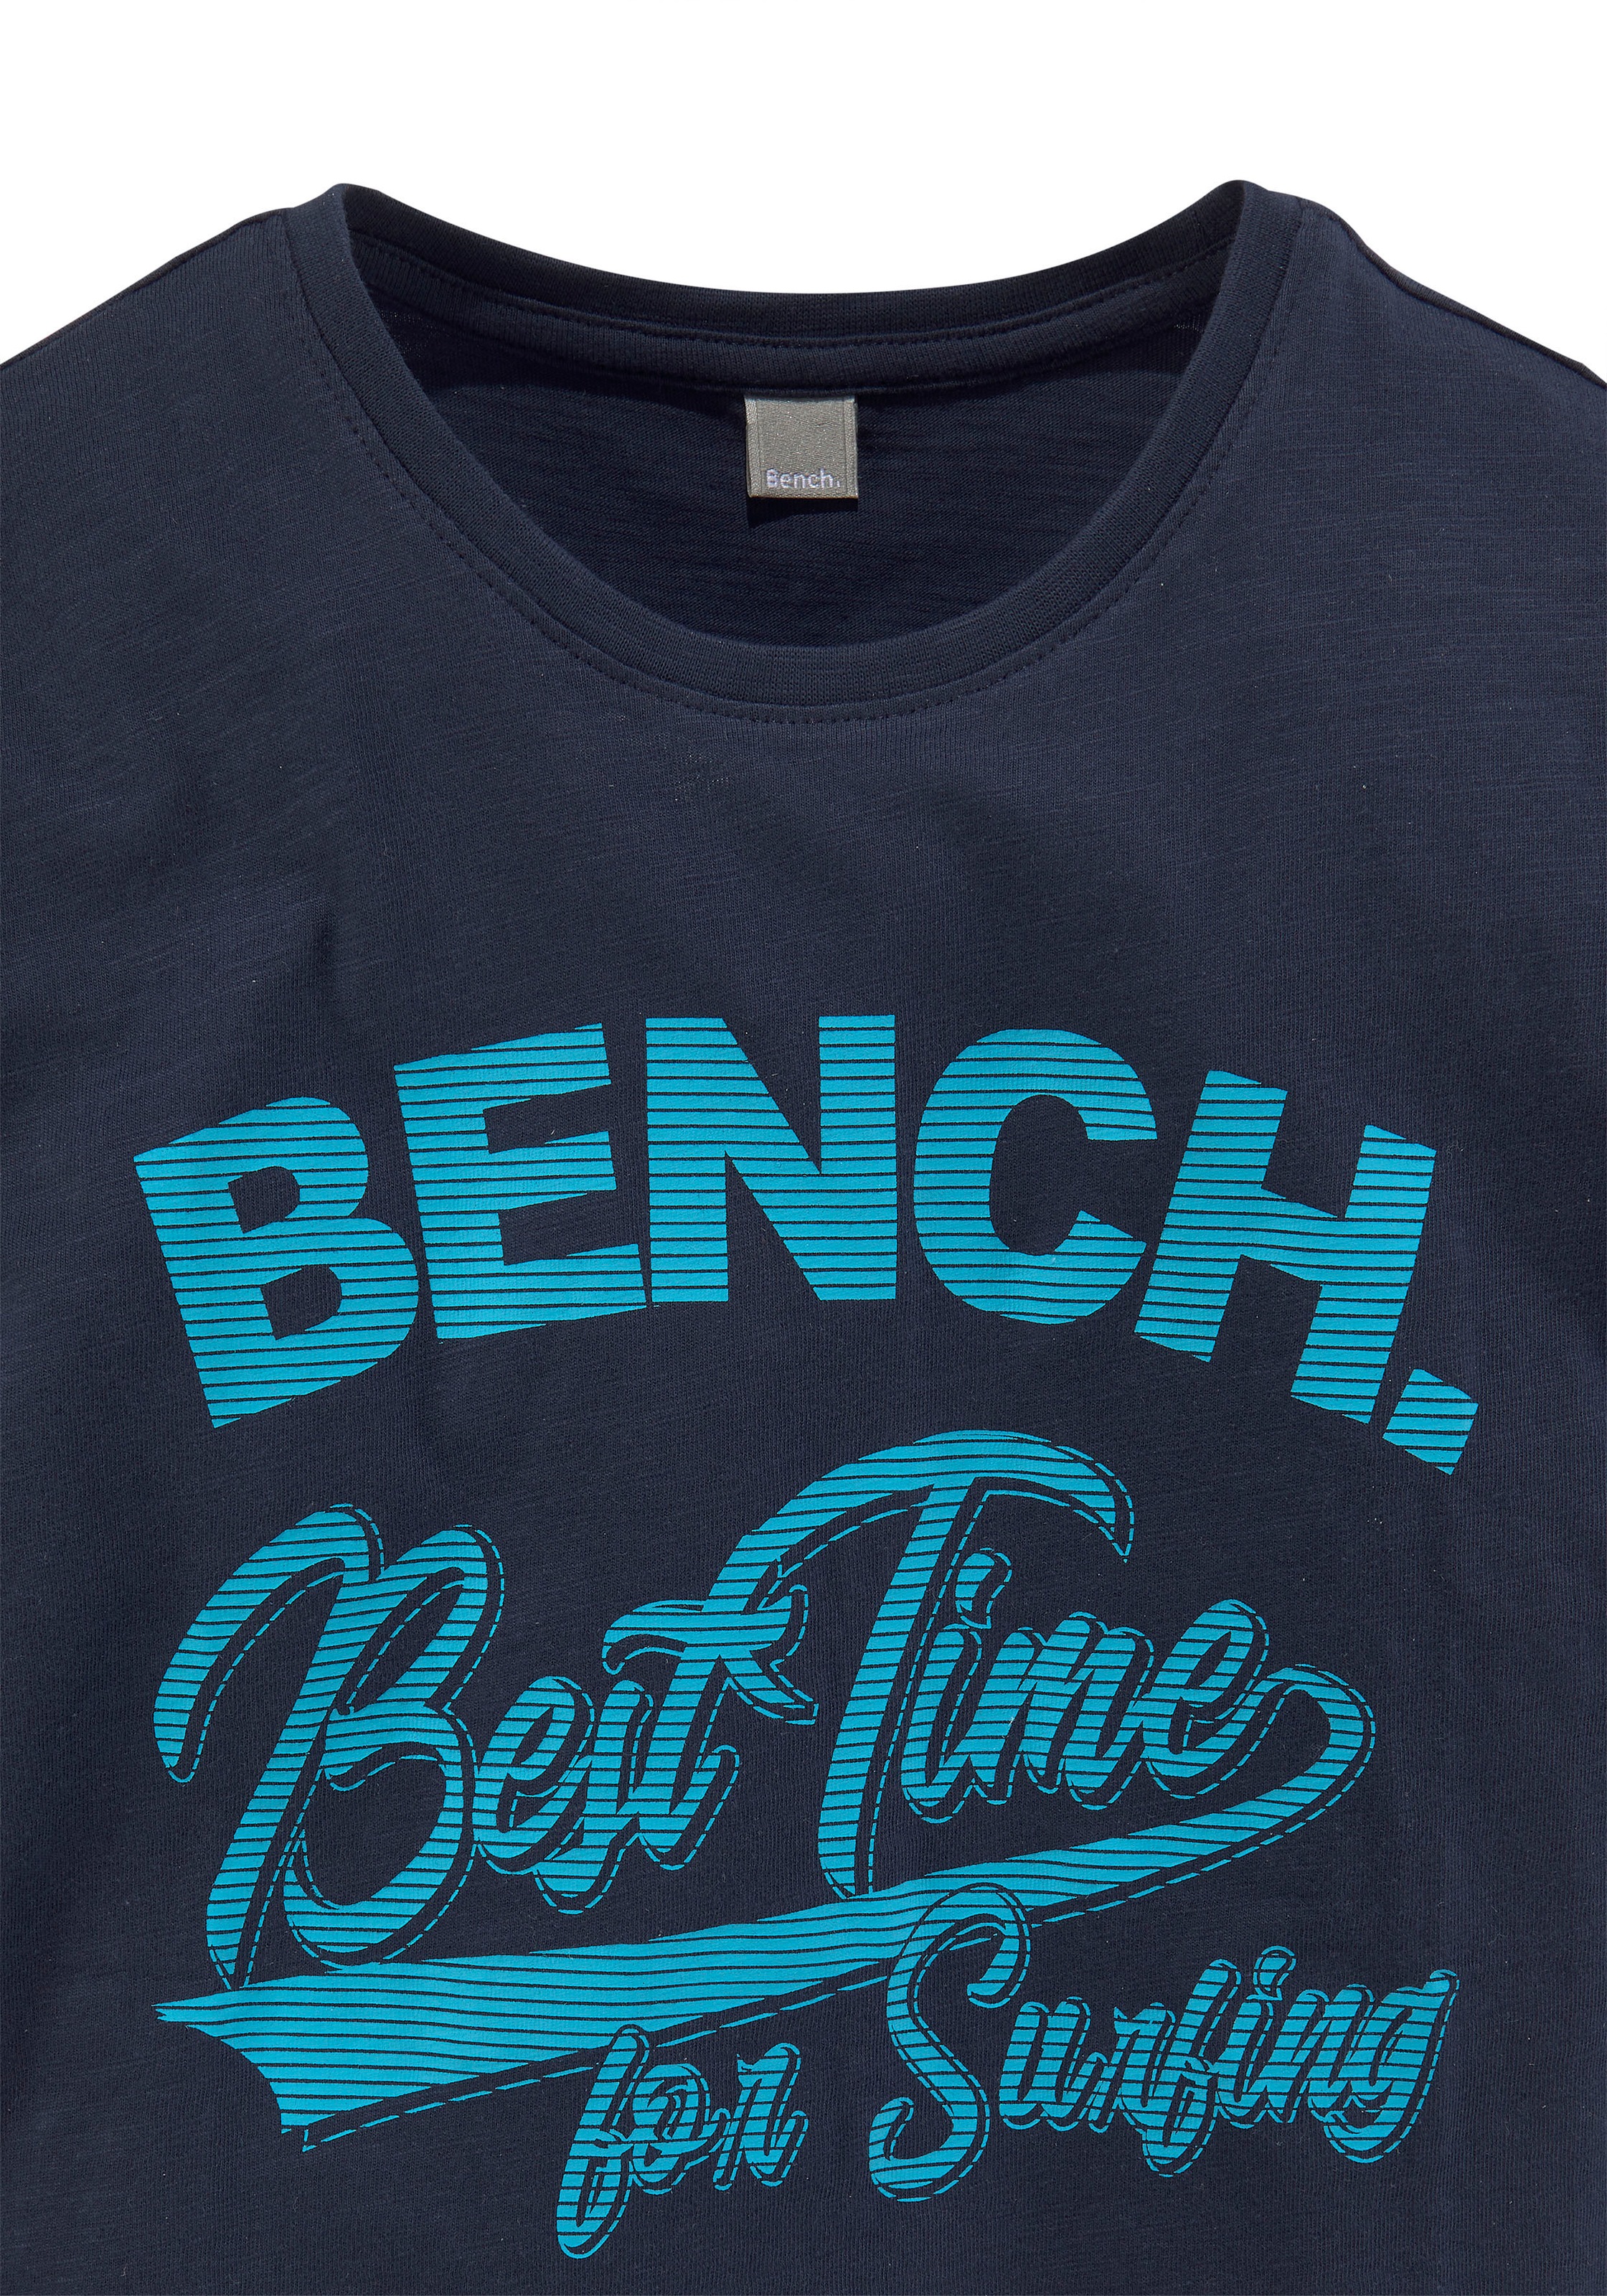 OTTO for »Best surfing« T-Shirt time Bench. bei